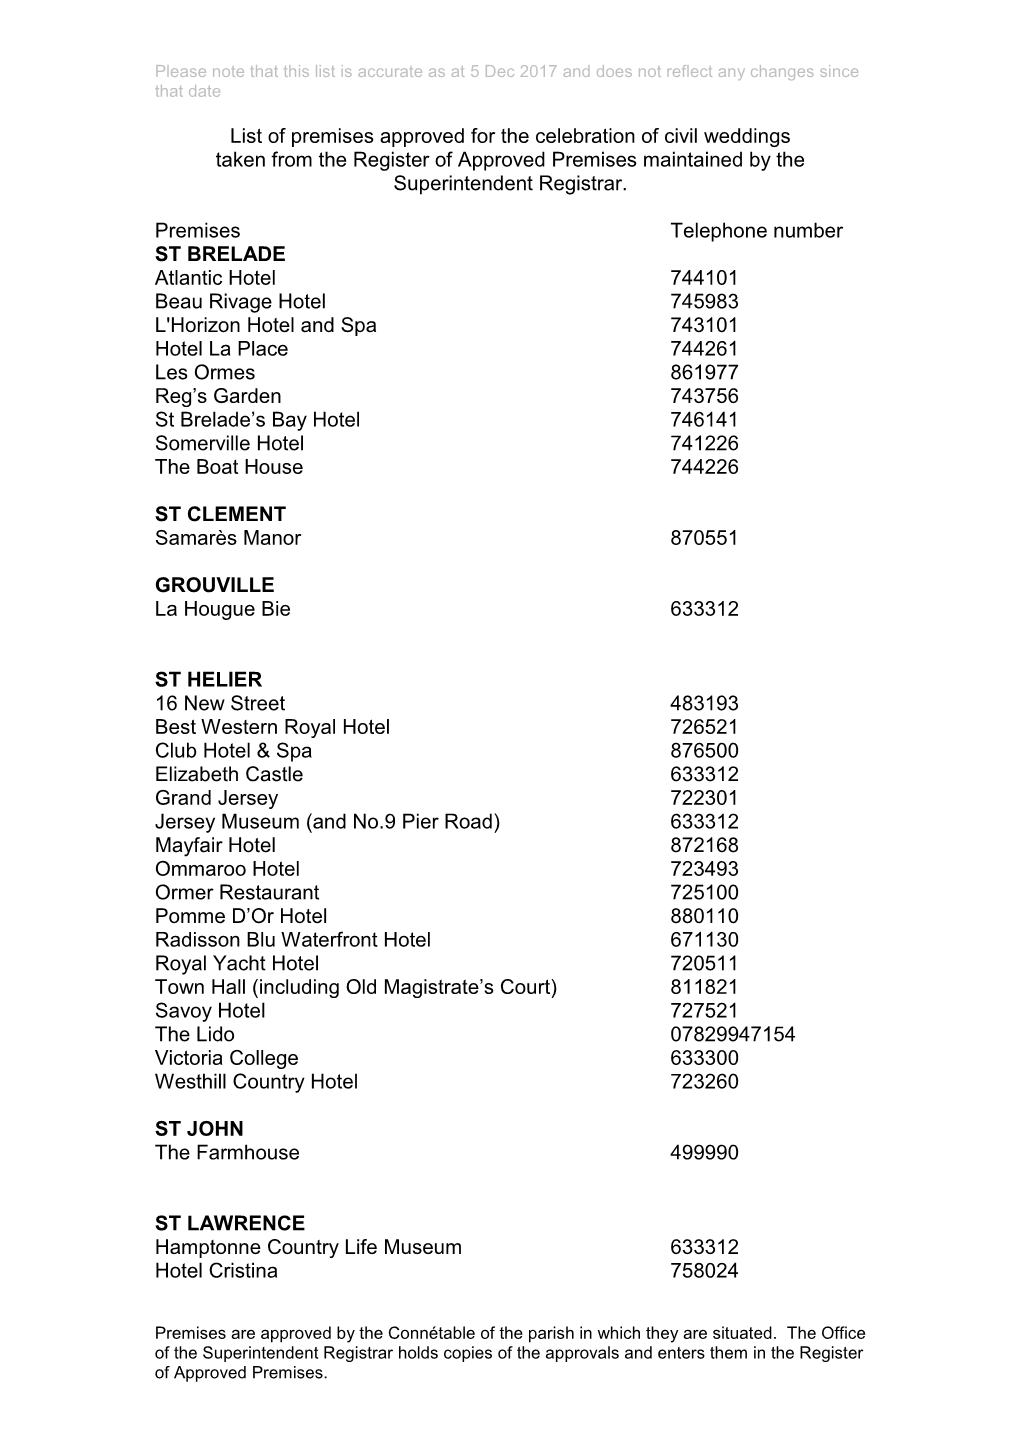 The Superintendent Registrar's List of Approved Venues